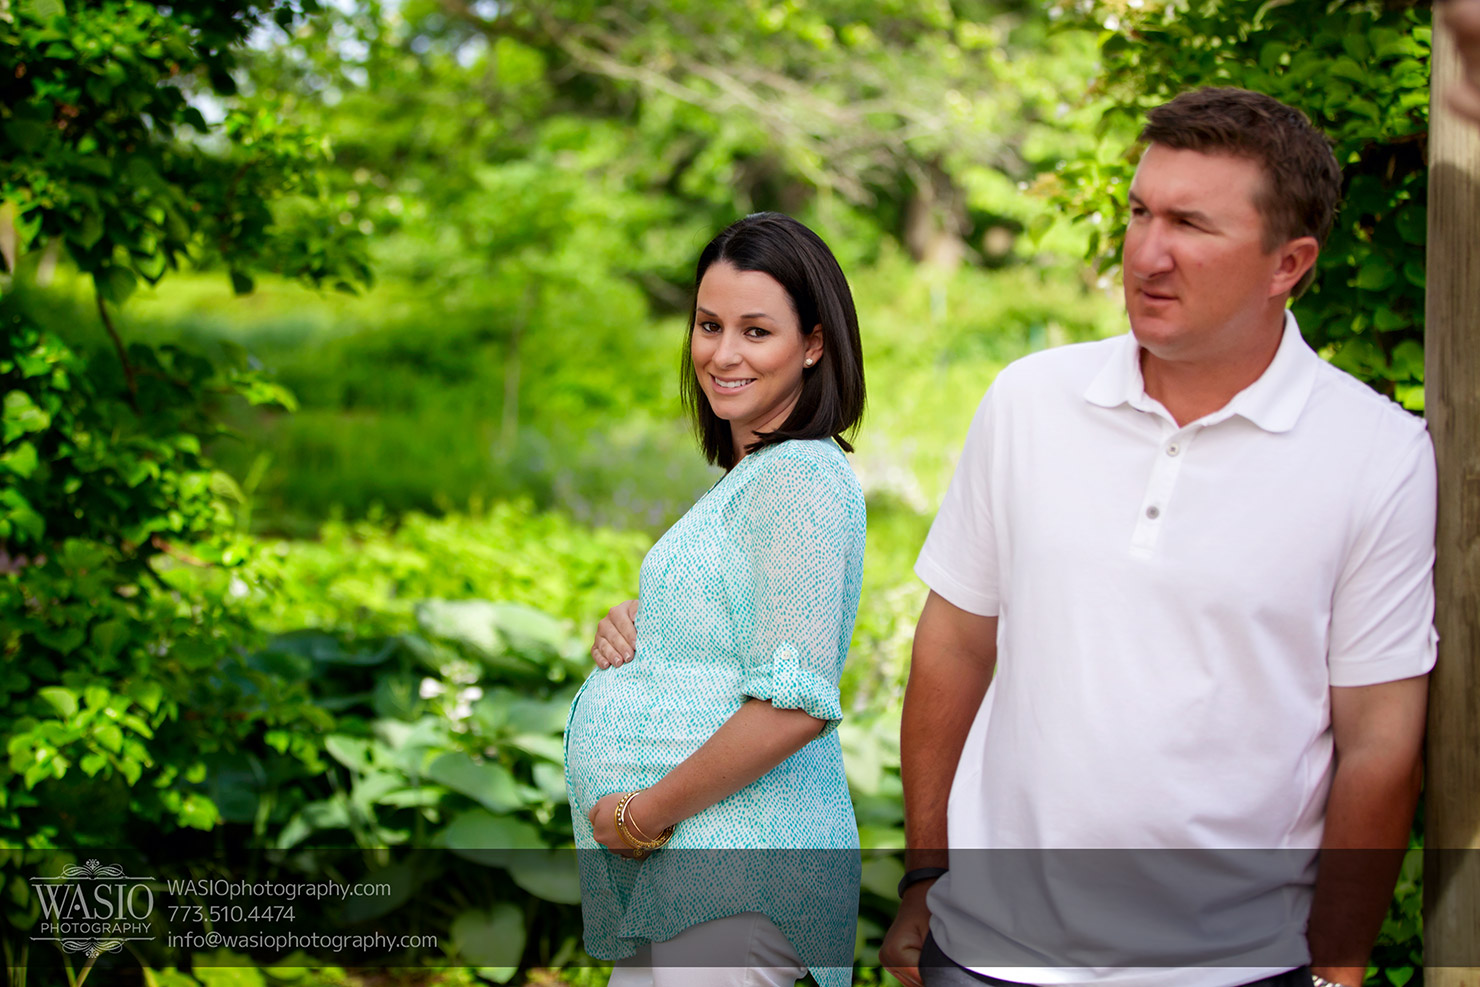 14 Photos of Maternity Photography Outdoors Funny